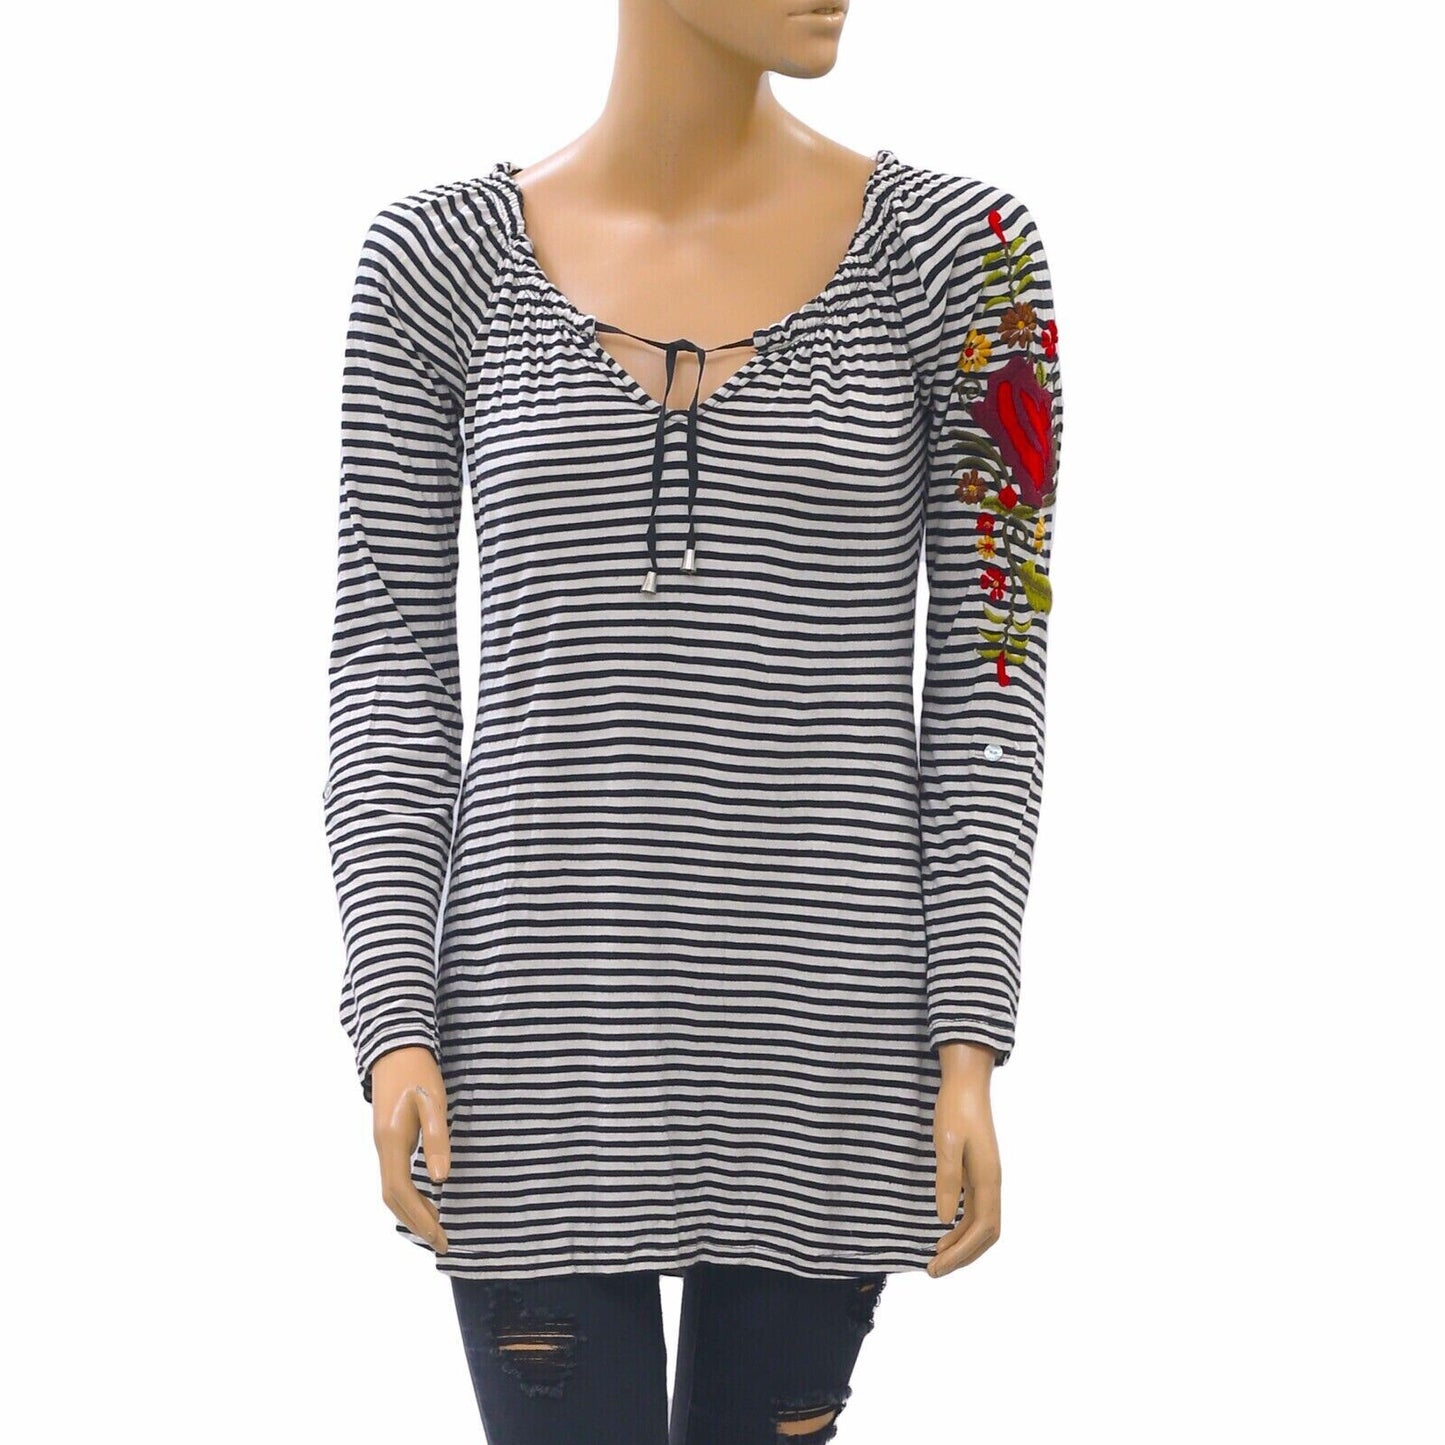 Caite Anthropologie Embroidered Striped Printed Tunic Top